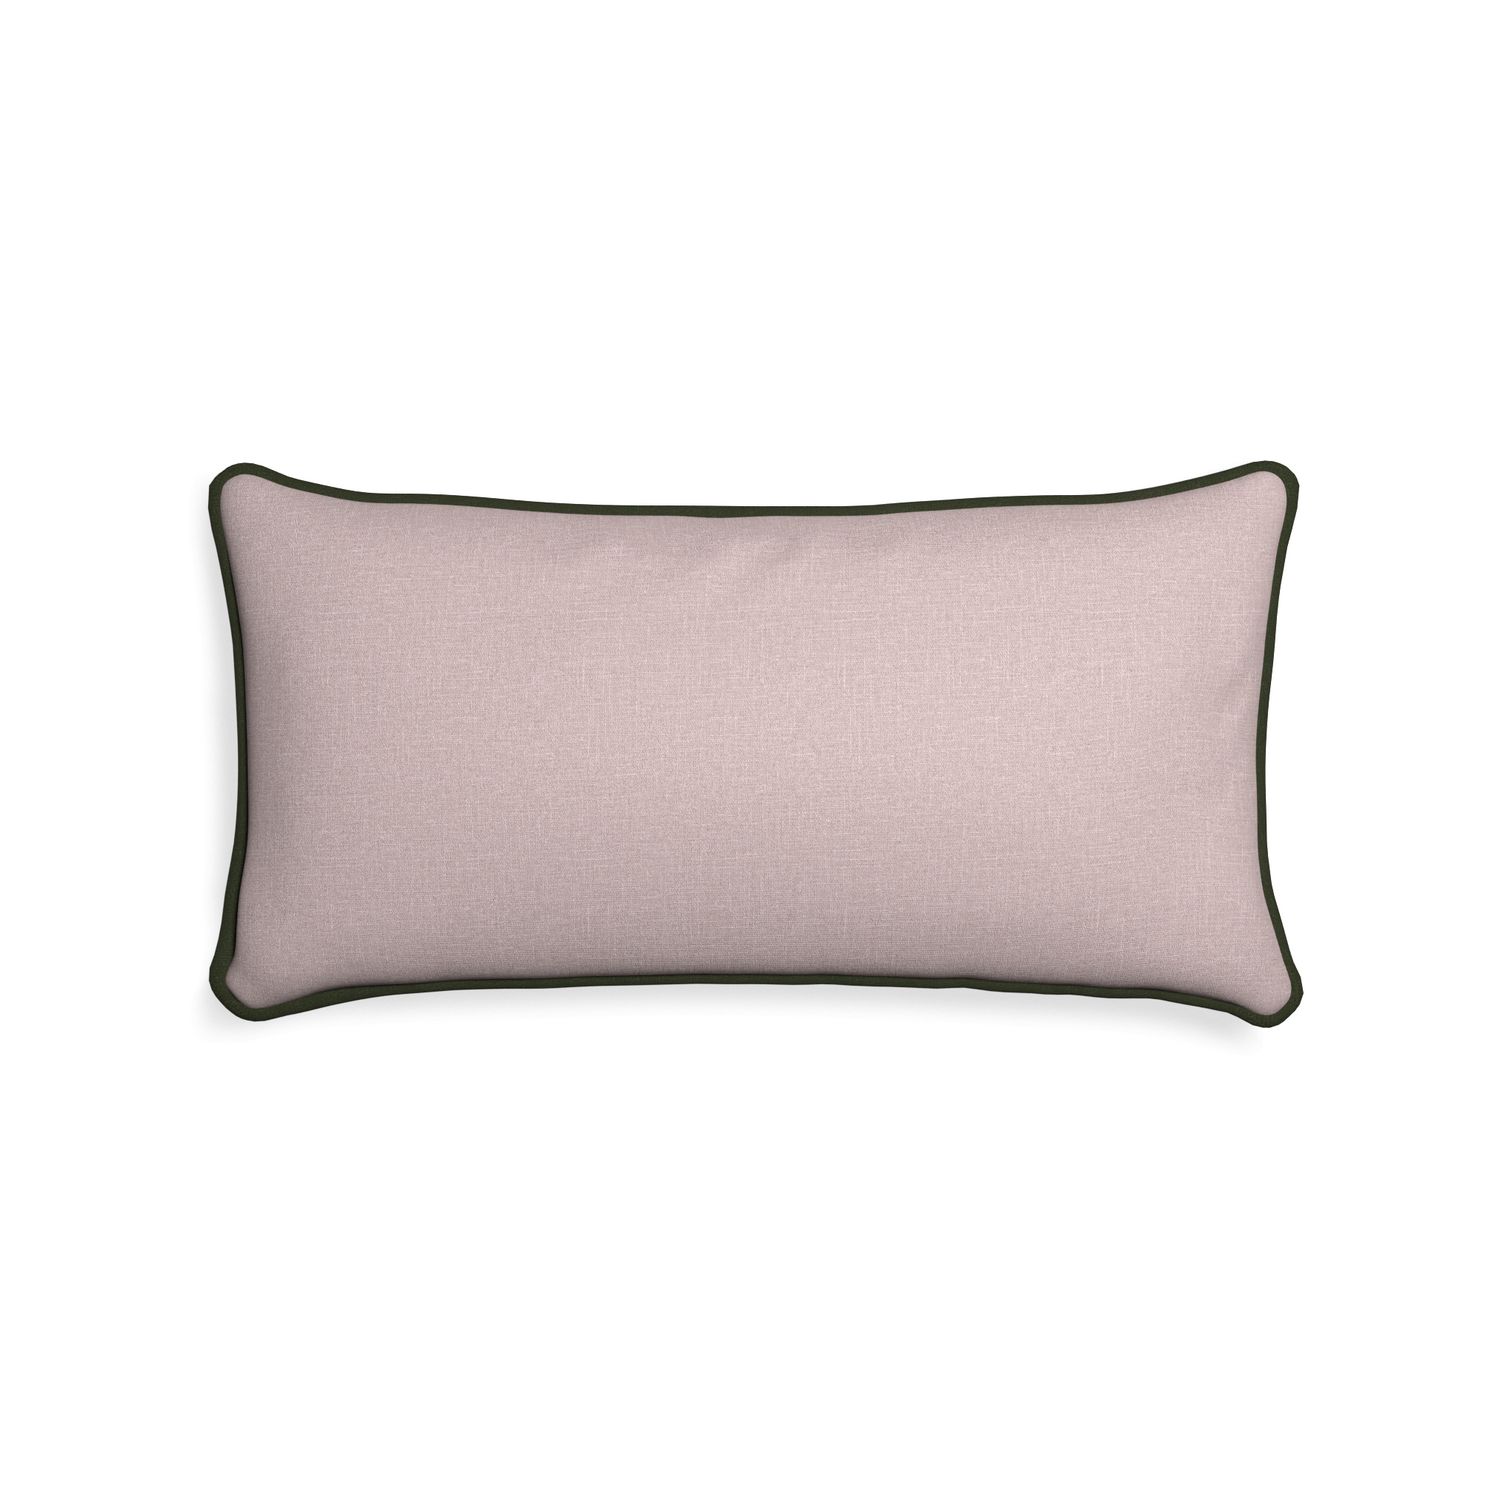 Midi-lumbar orchid custom mauve pinkpillow with f piping on white background